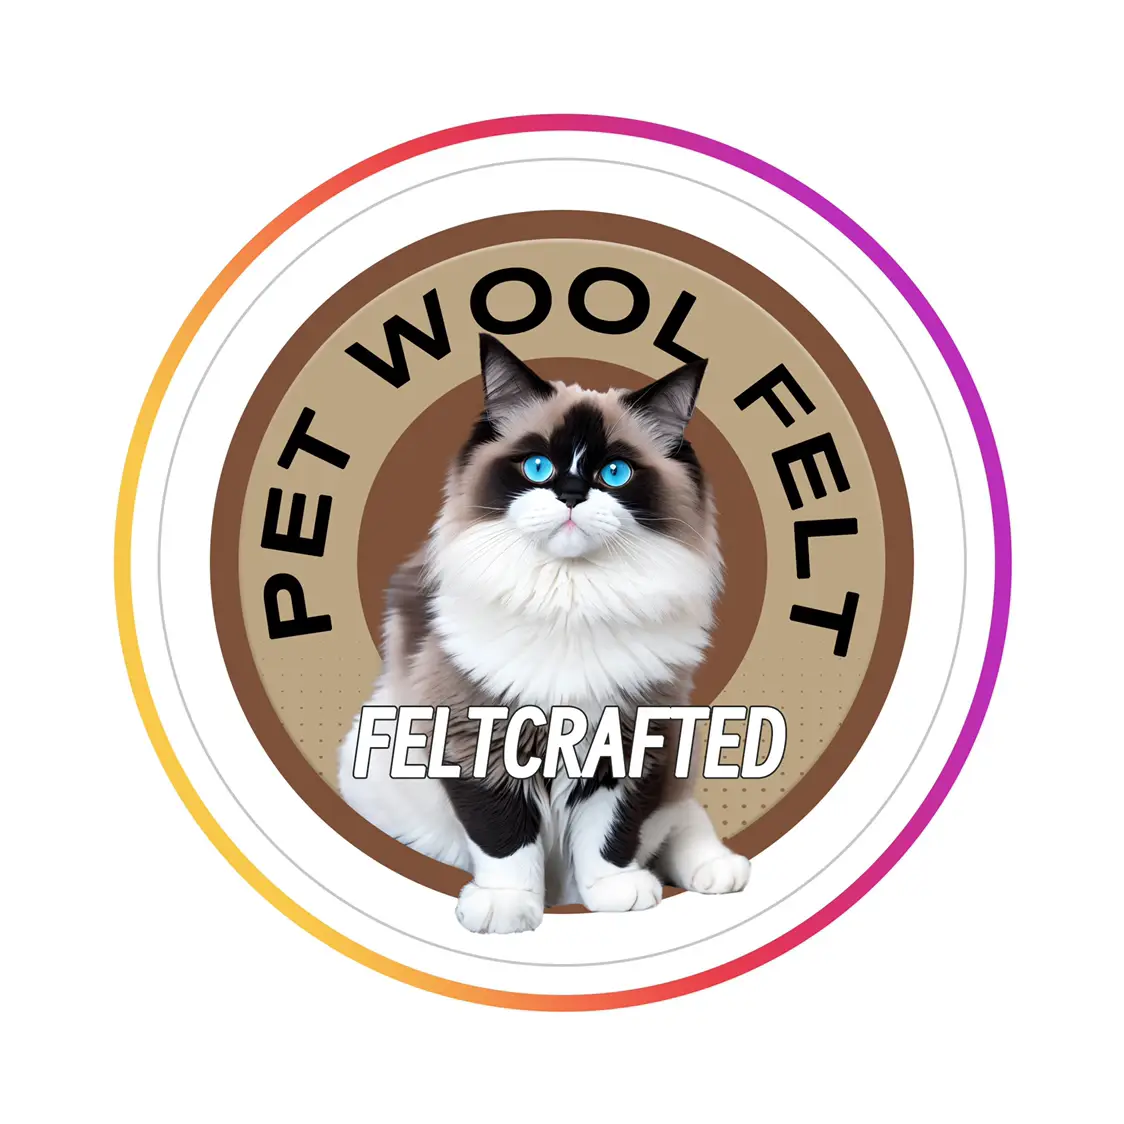 How to Make Wool Felt Pet Eyes, Video published by Feltcrafted